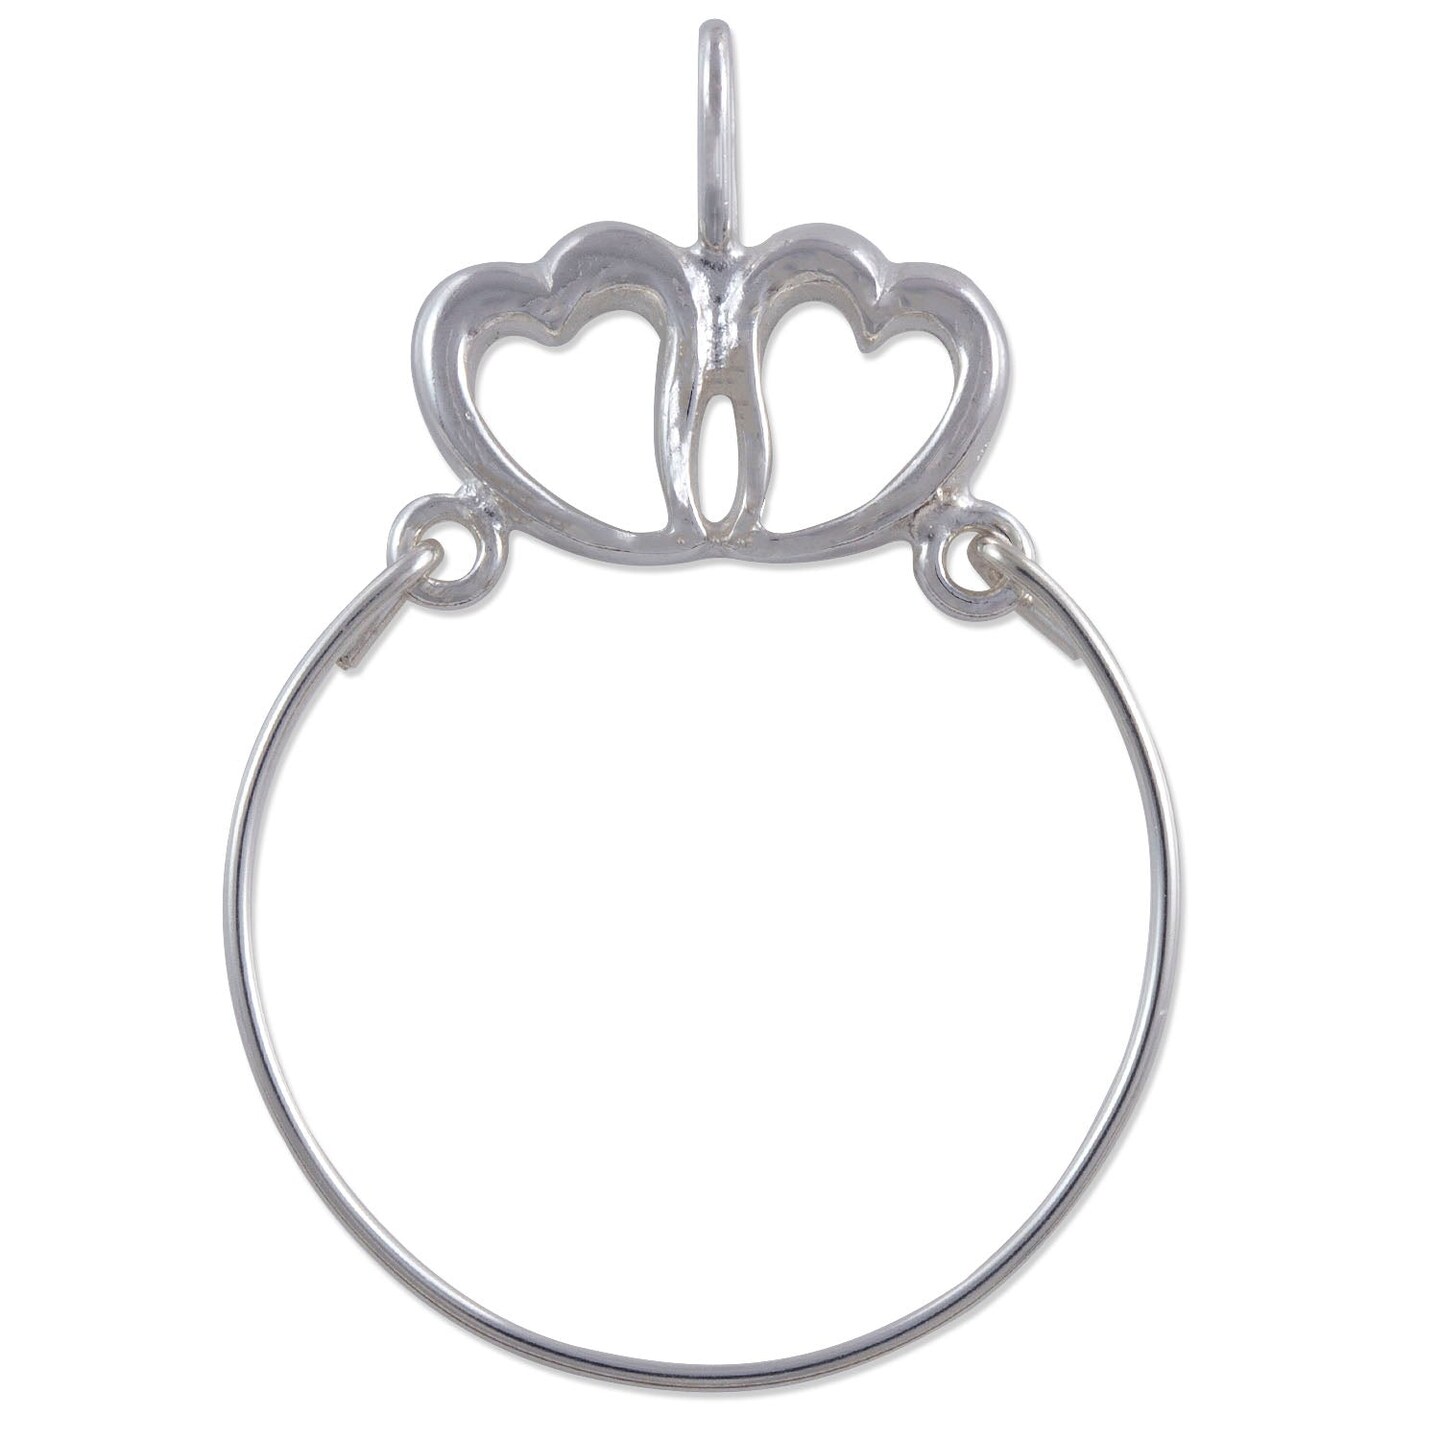 Two Hearts Charm Holder for DIY Jewelry Making 38x27mm .925 Sterling Silver (1-Pc)